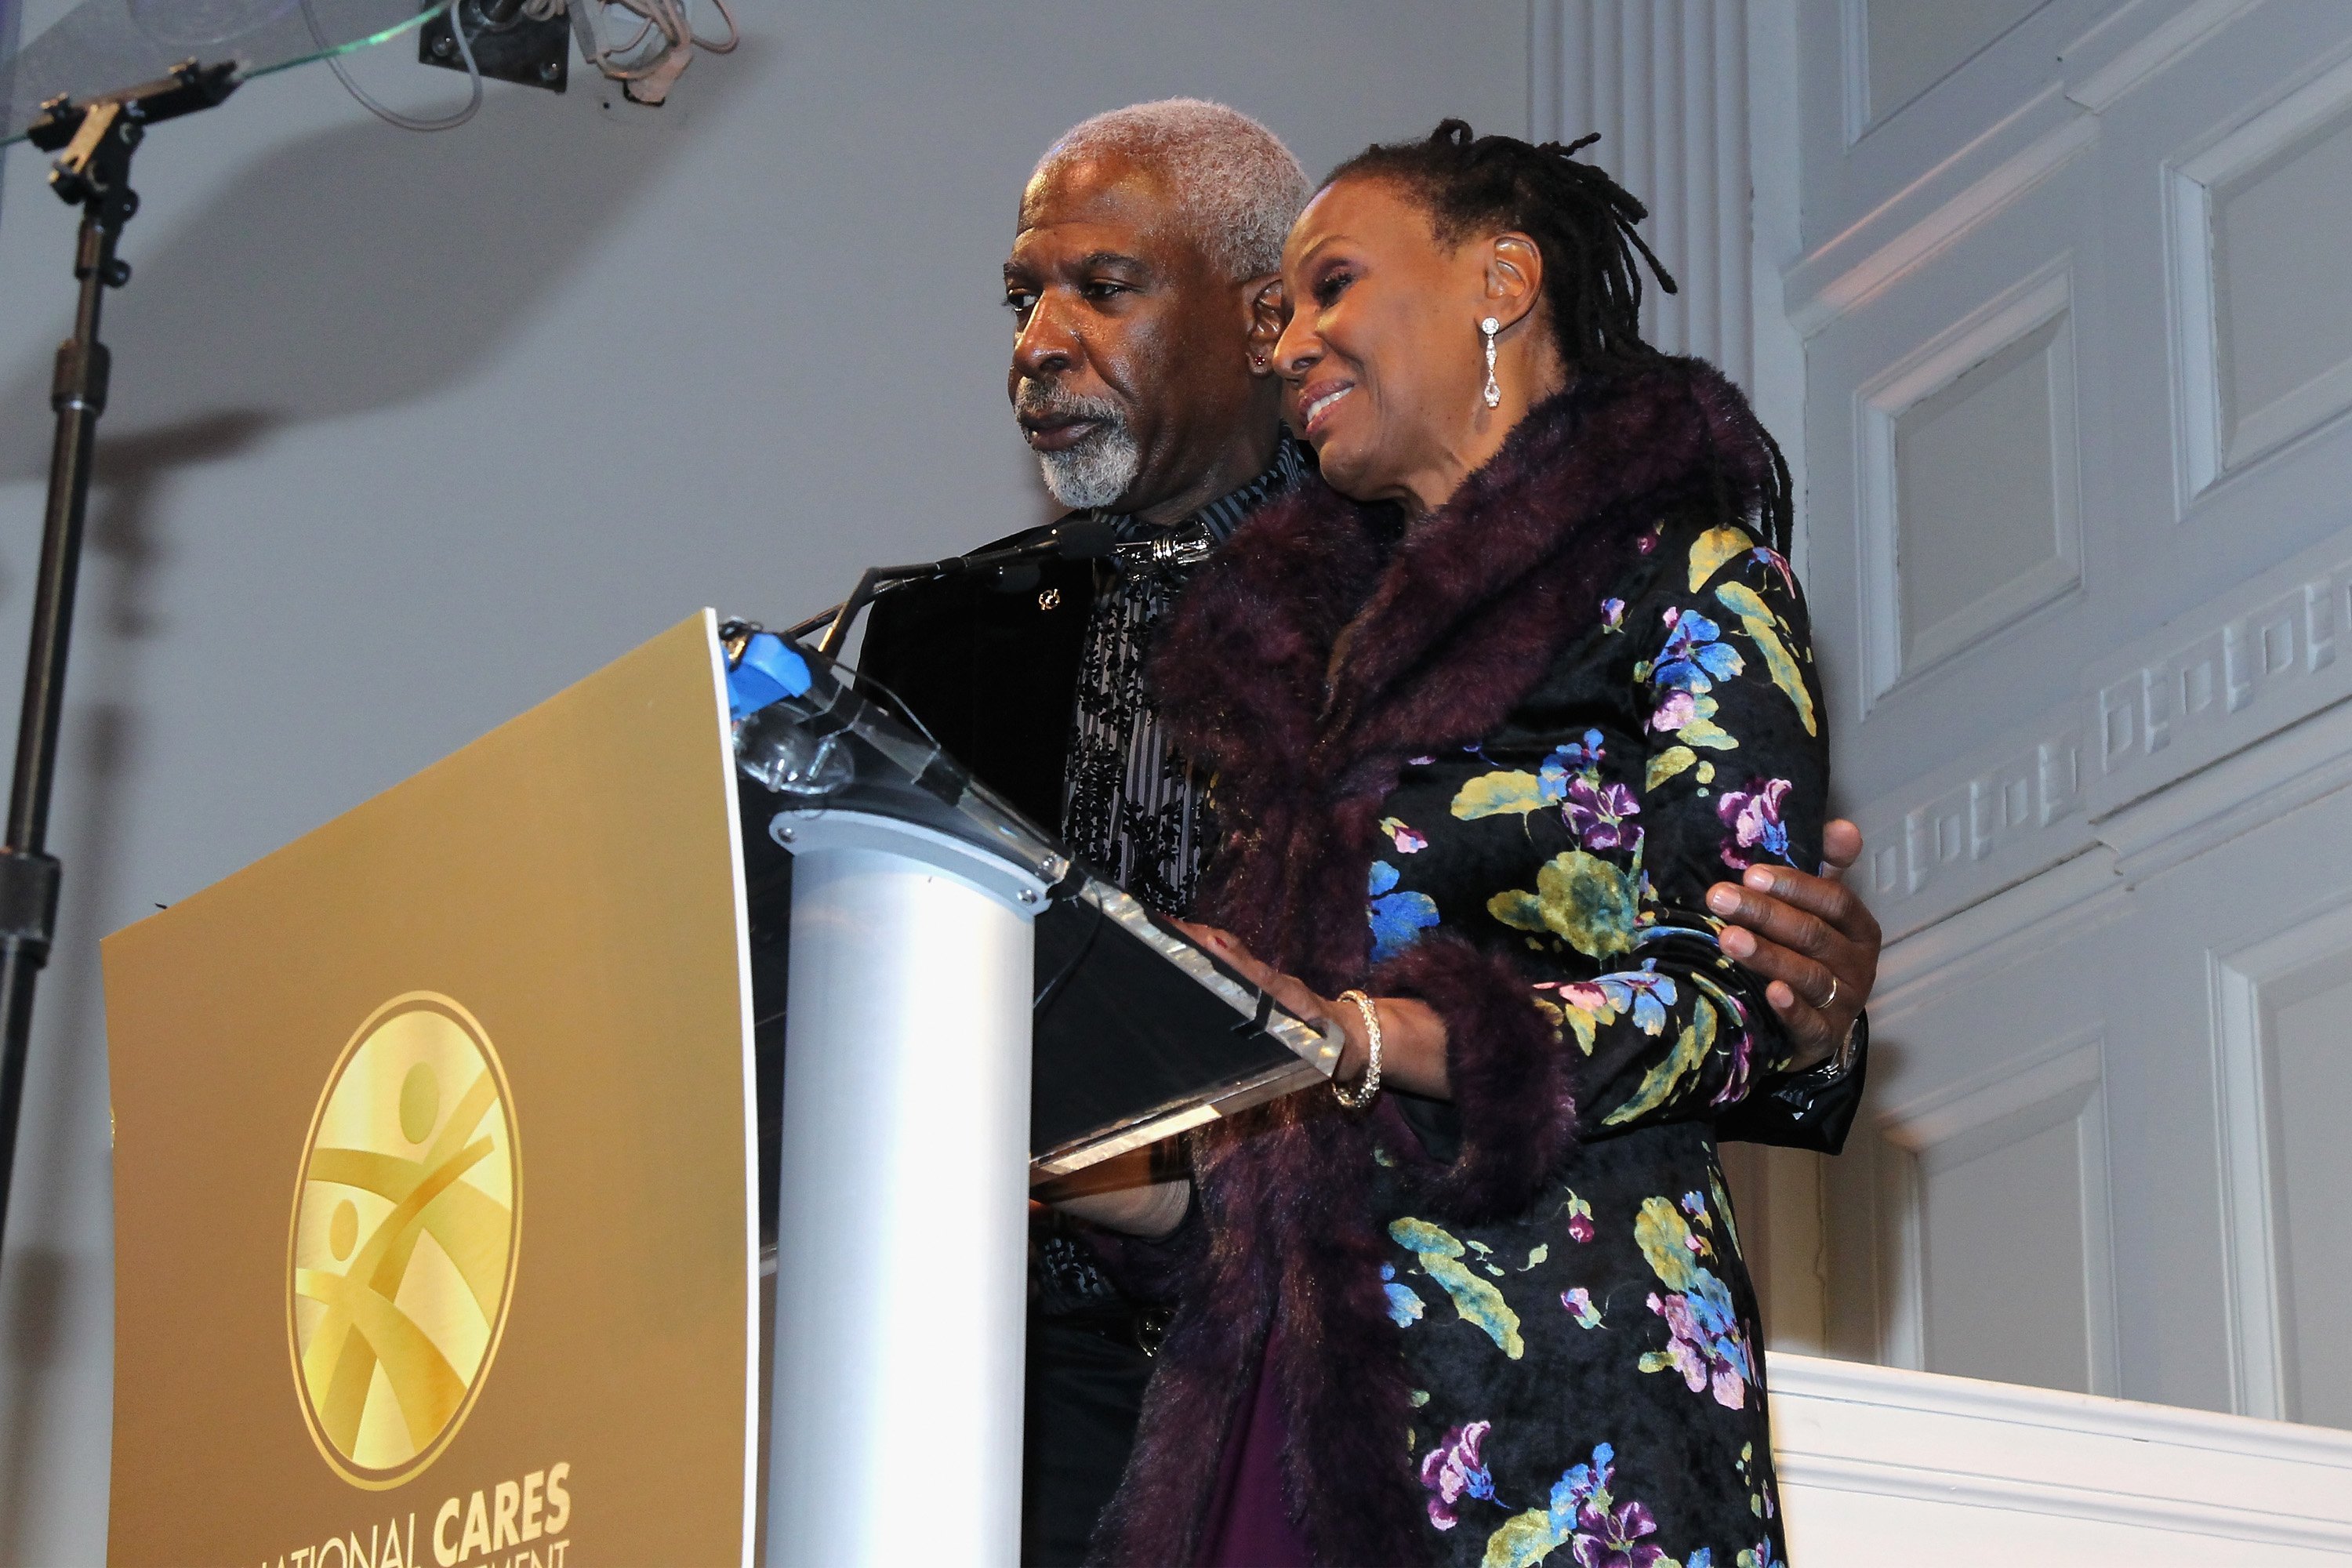  Dan Gasby and B. Smith speak at National CARES Mentoring Movement event in 2016 | Getty Images